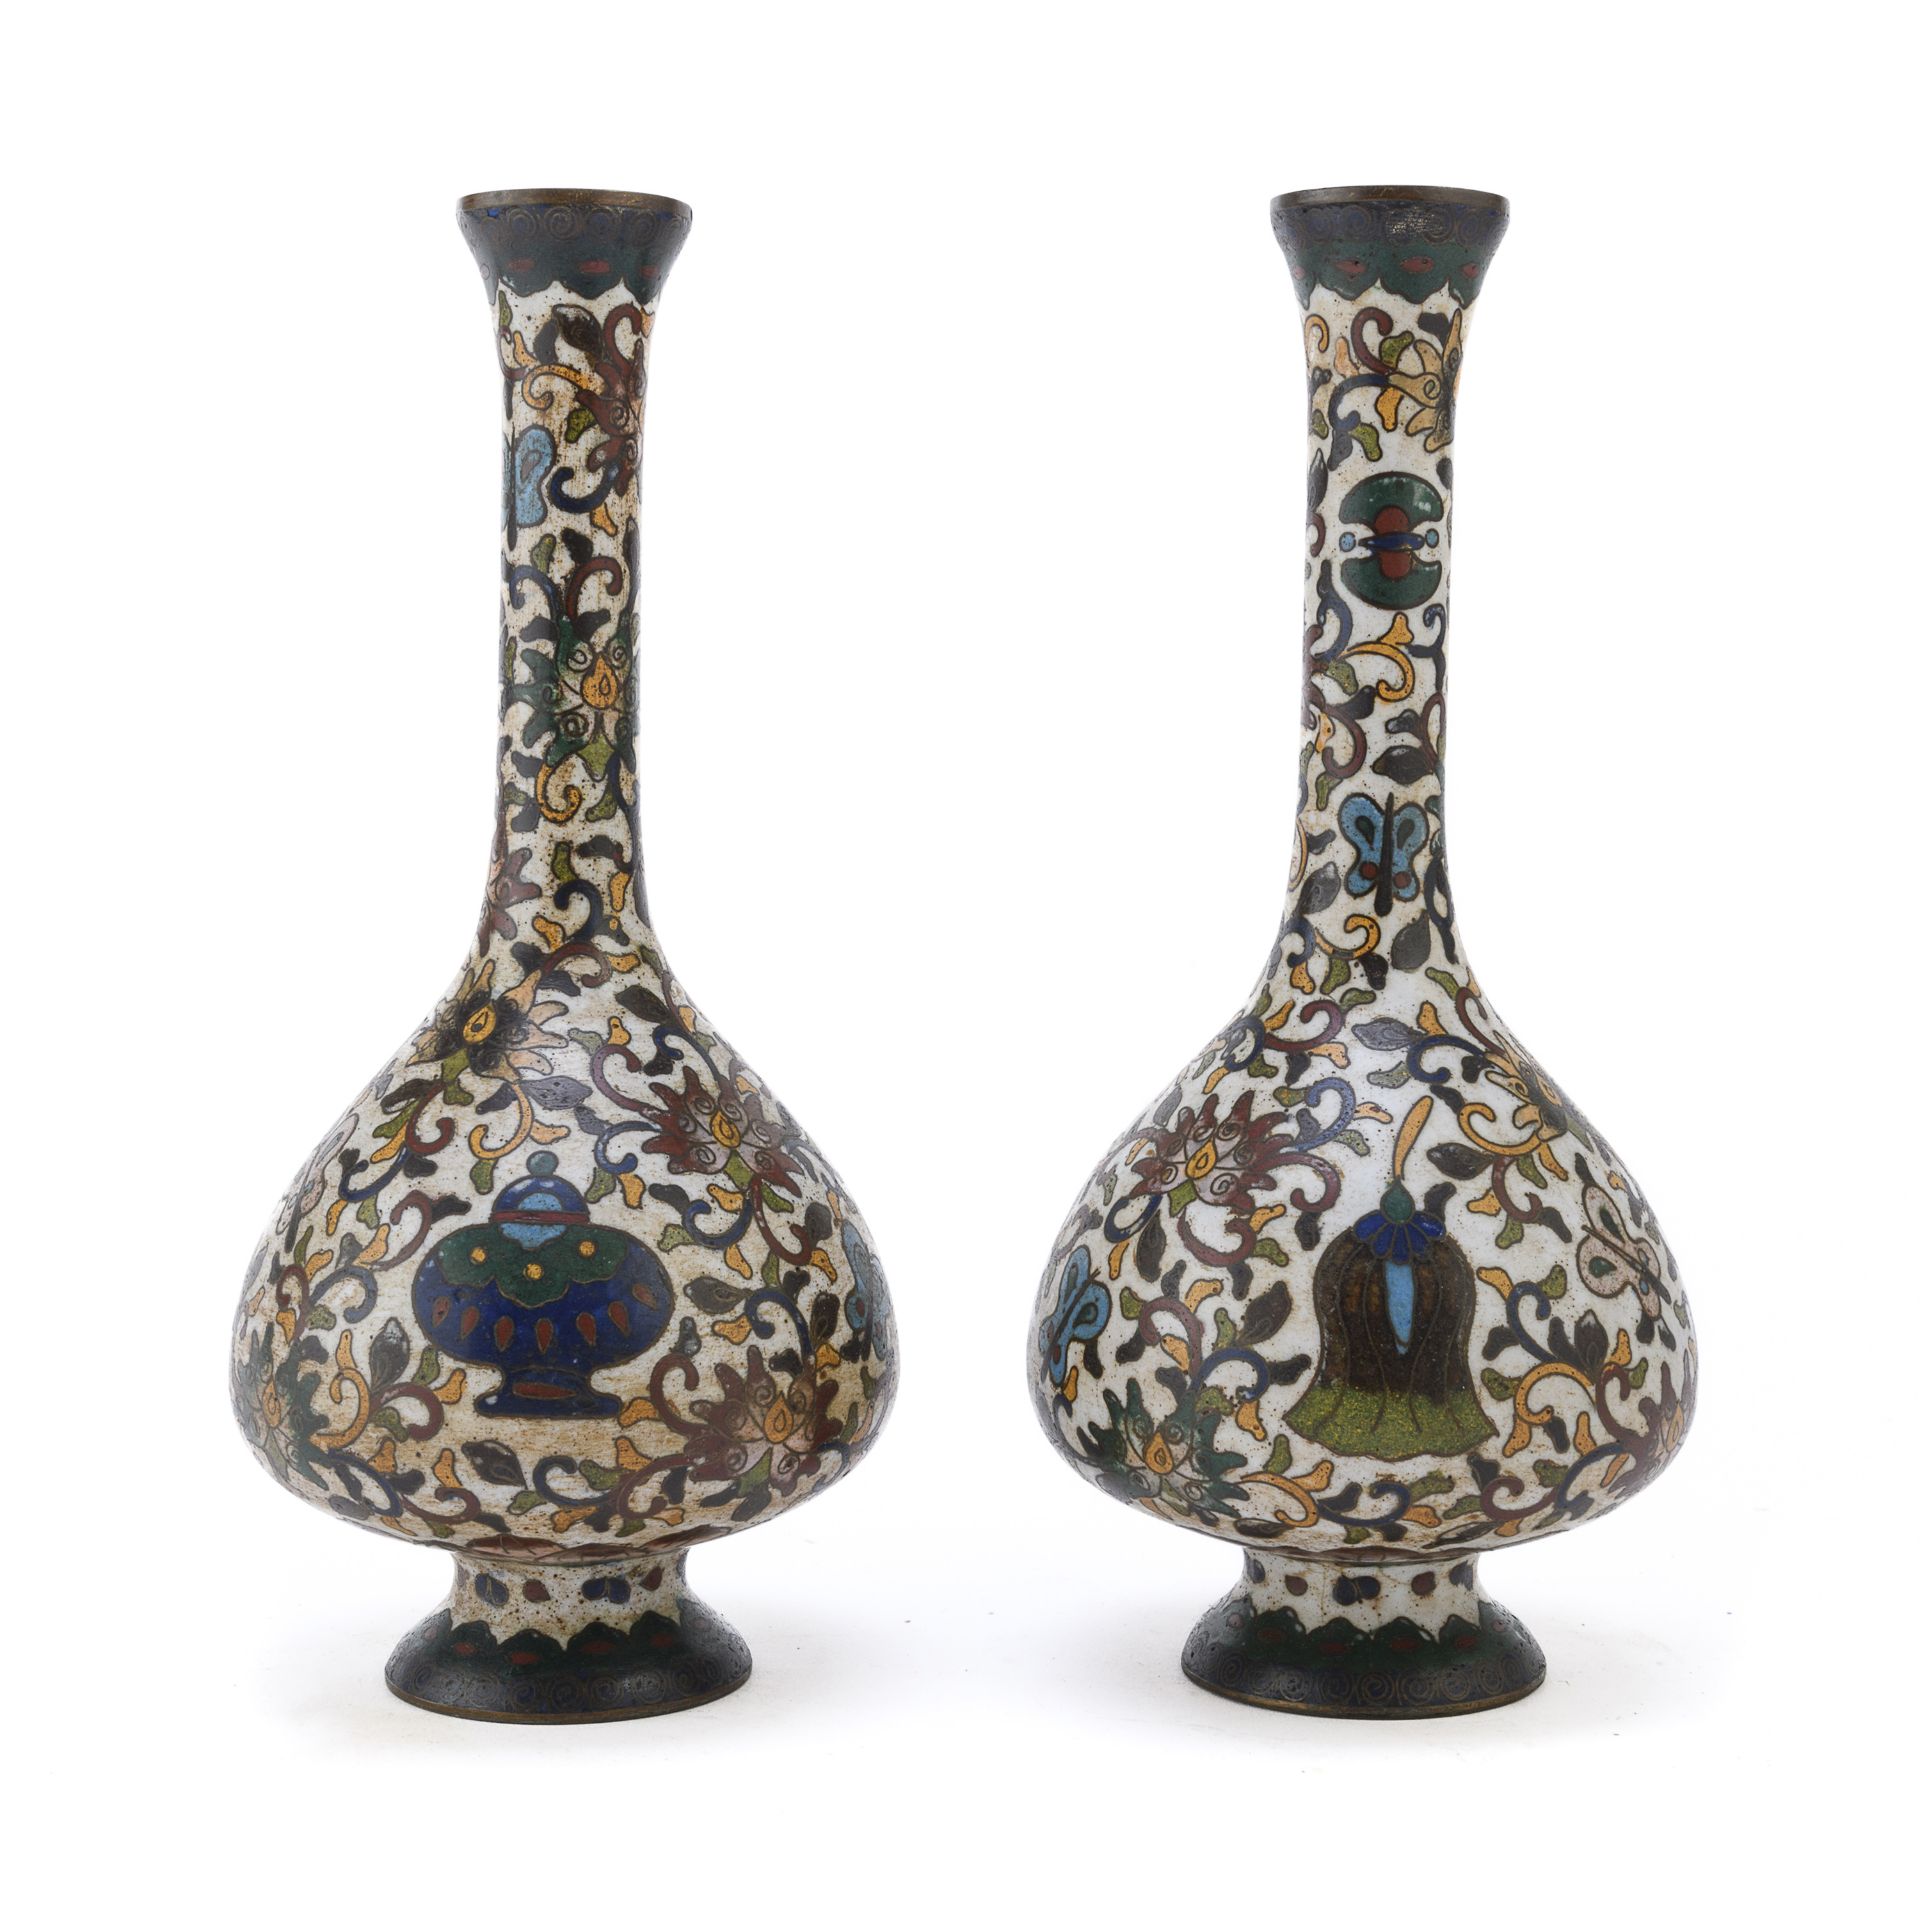 PAIR OF SMALL METAL VASES WITH CLOISONNÈ ENAMELS CHINA EARLY 20TH CENTURY